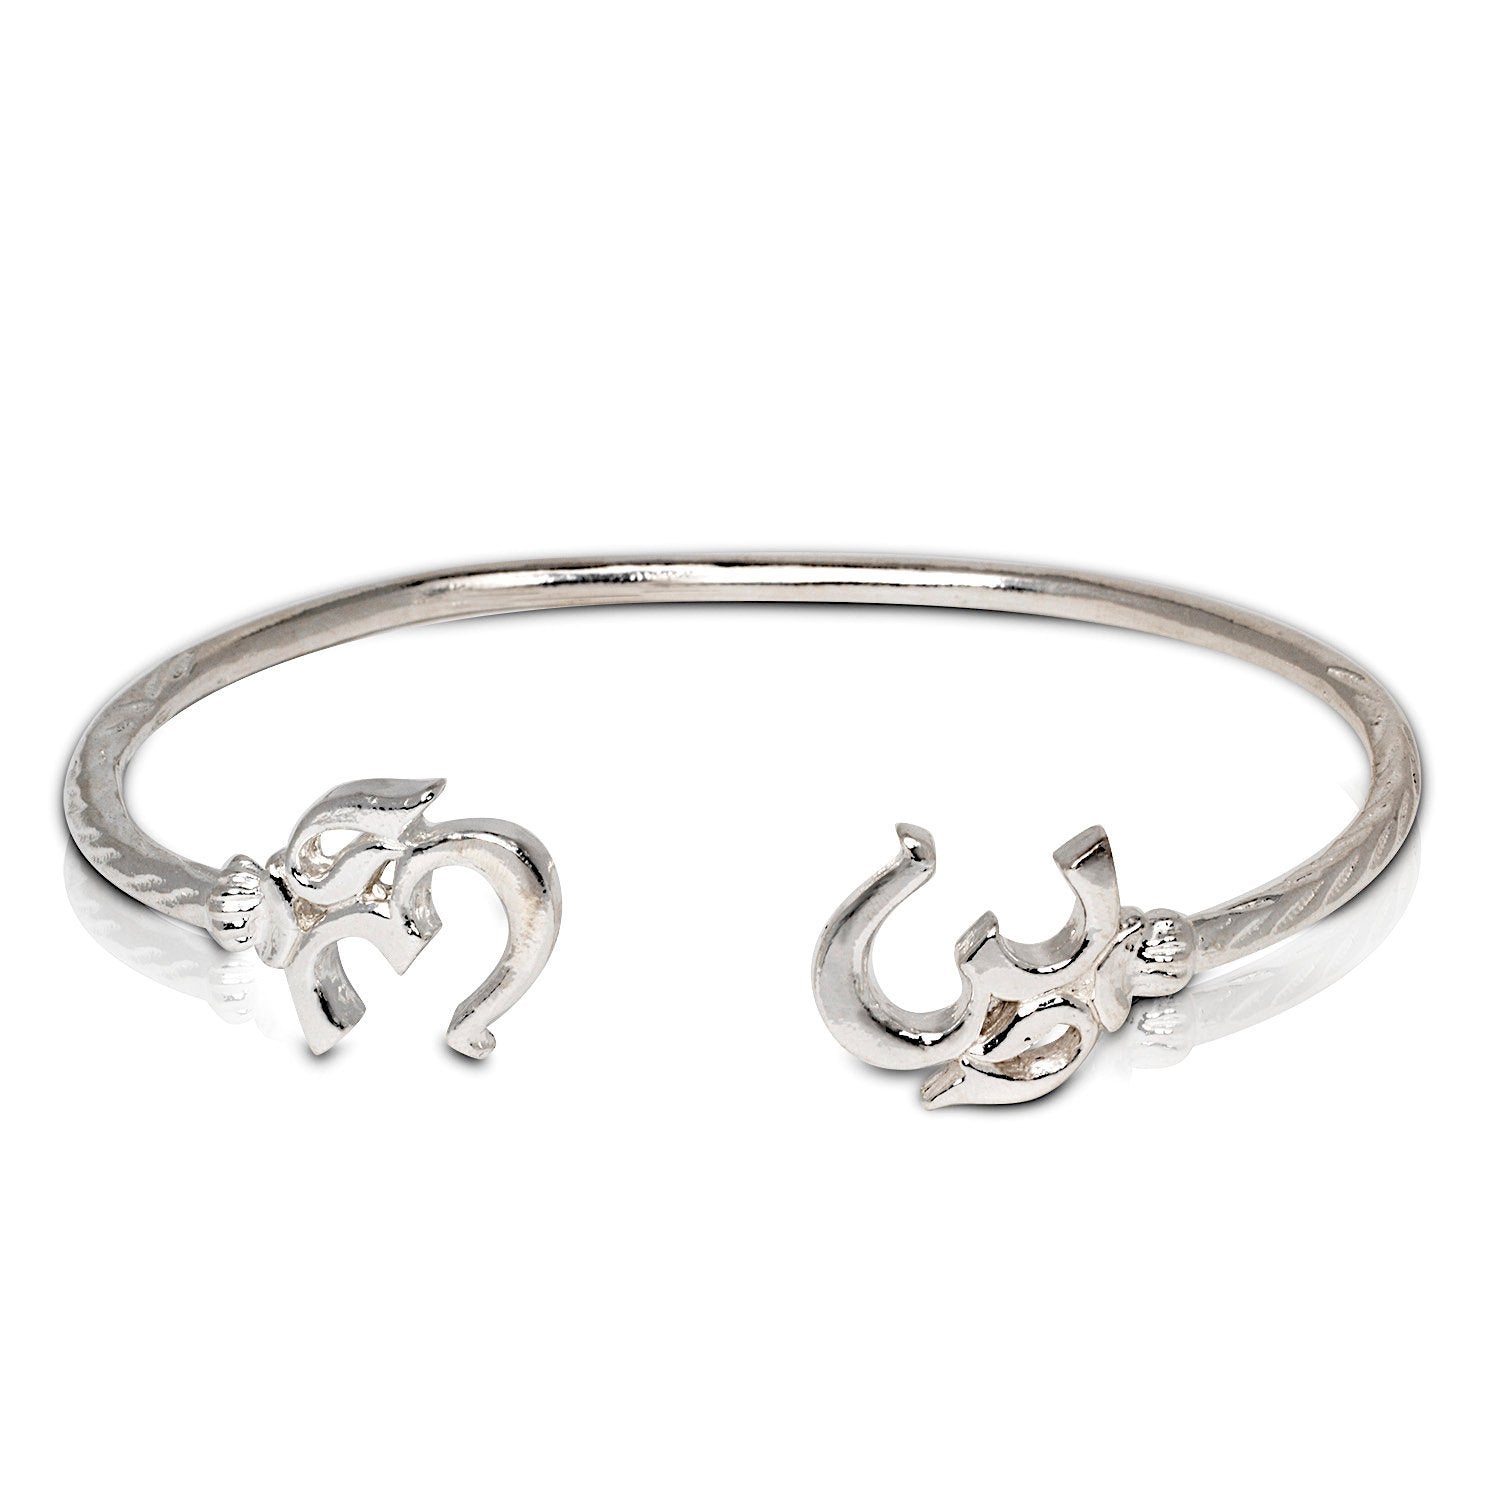 Solid .925 Sterling Silver Om Symbol Bangle (Made in USA) - Betterjewelry